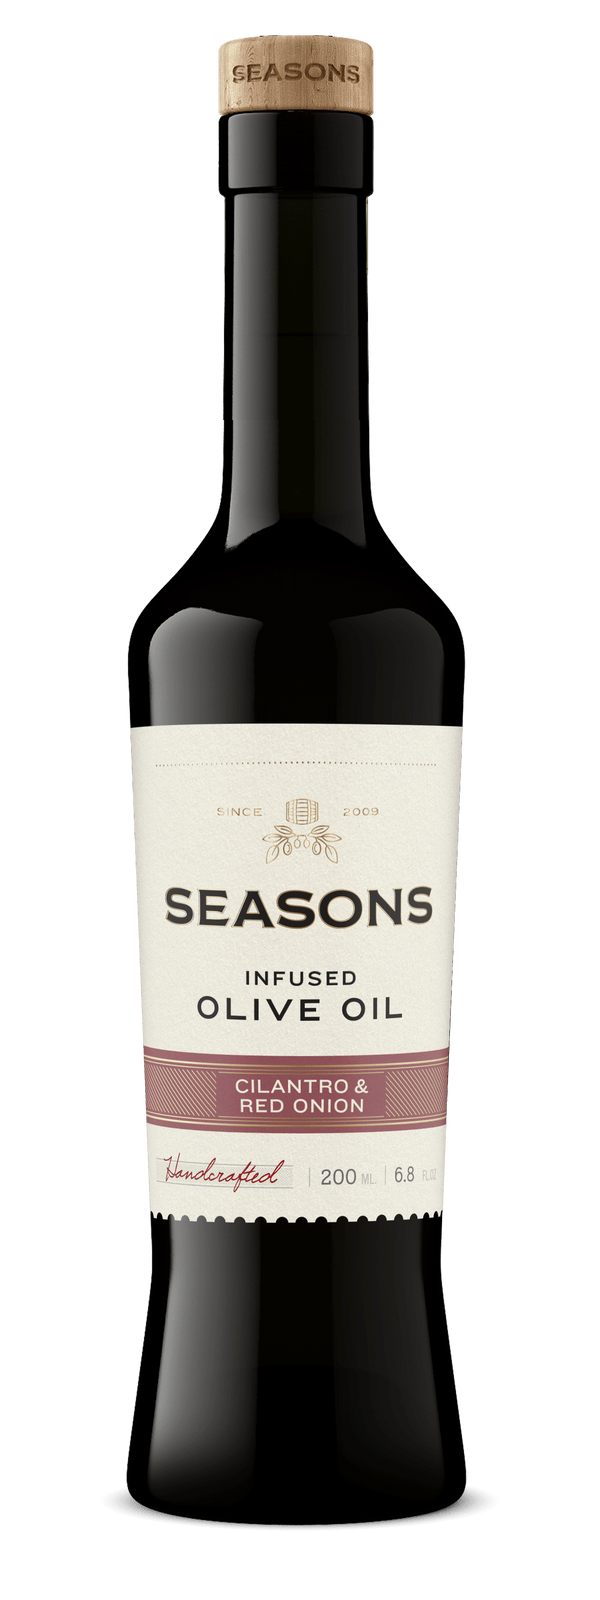 Seasons Infused Olive Oil 375mL Cilantro & Red Onion